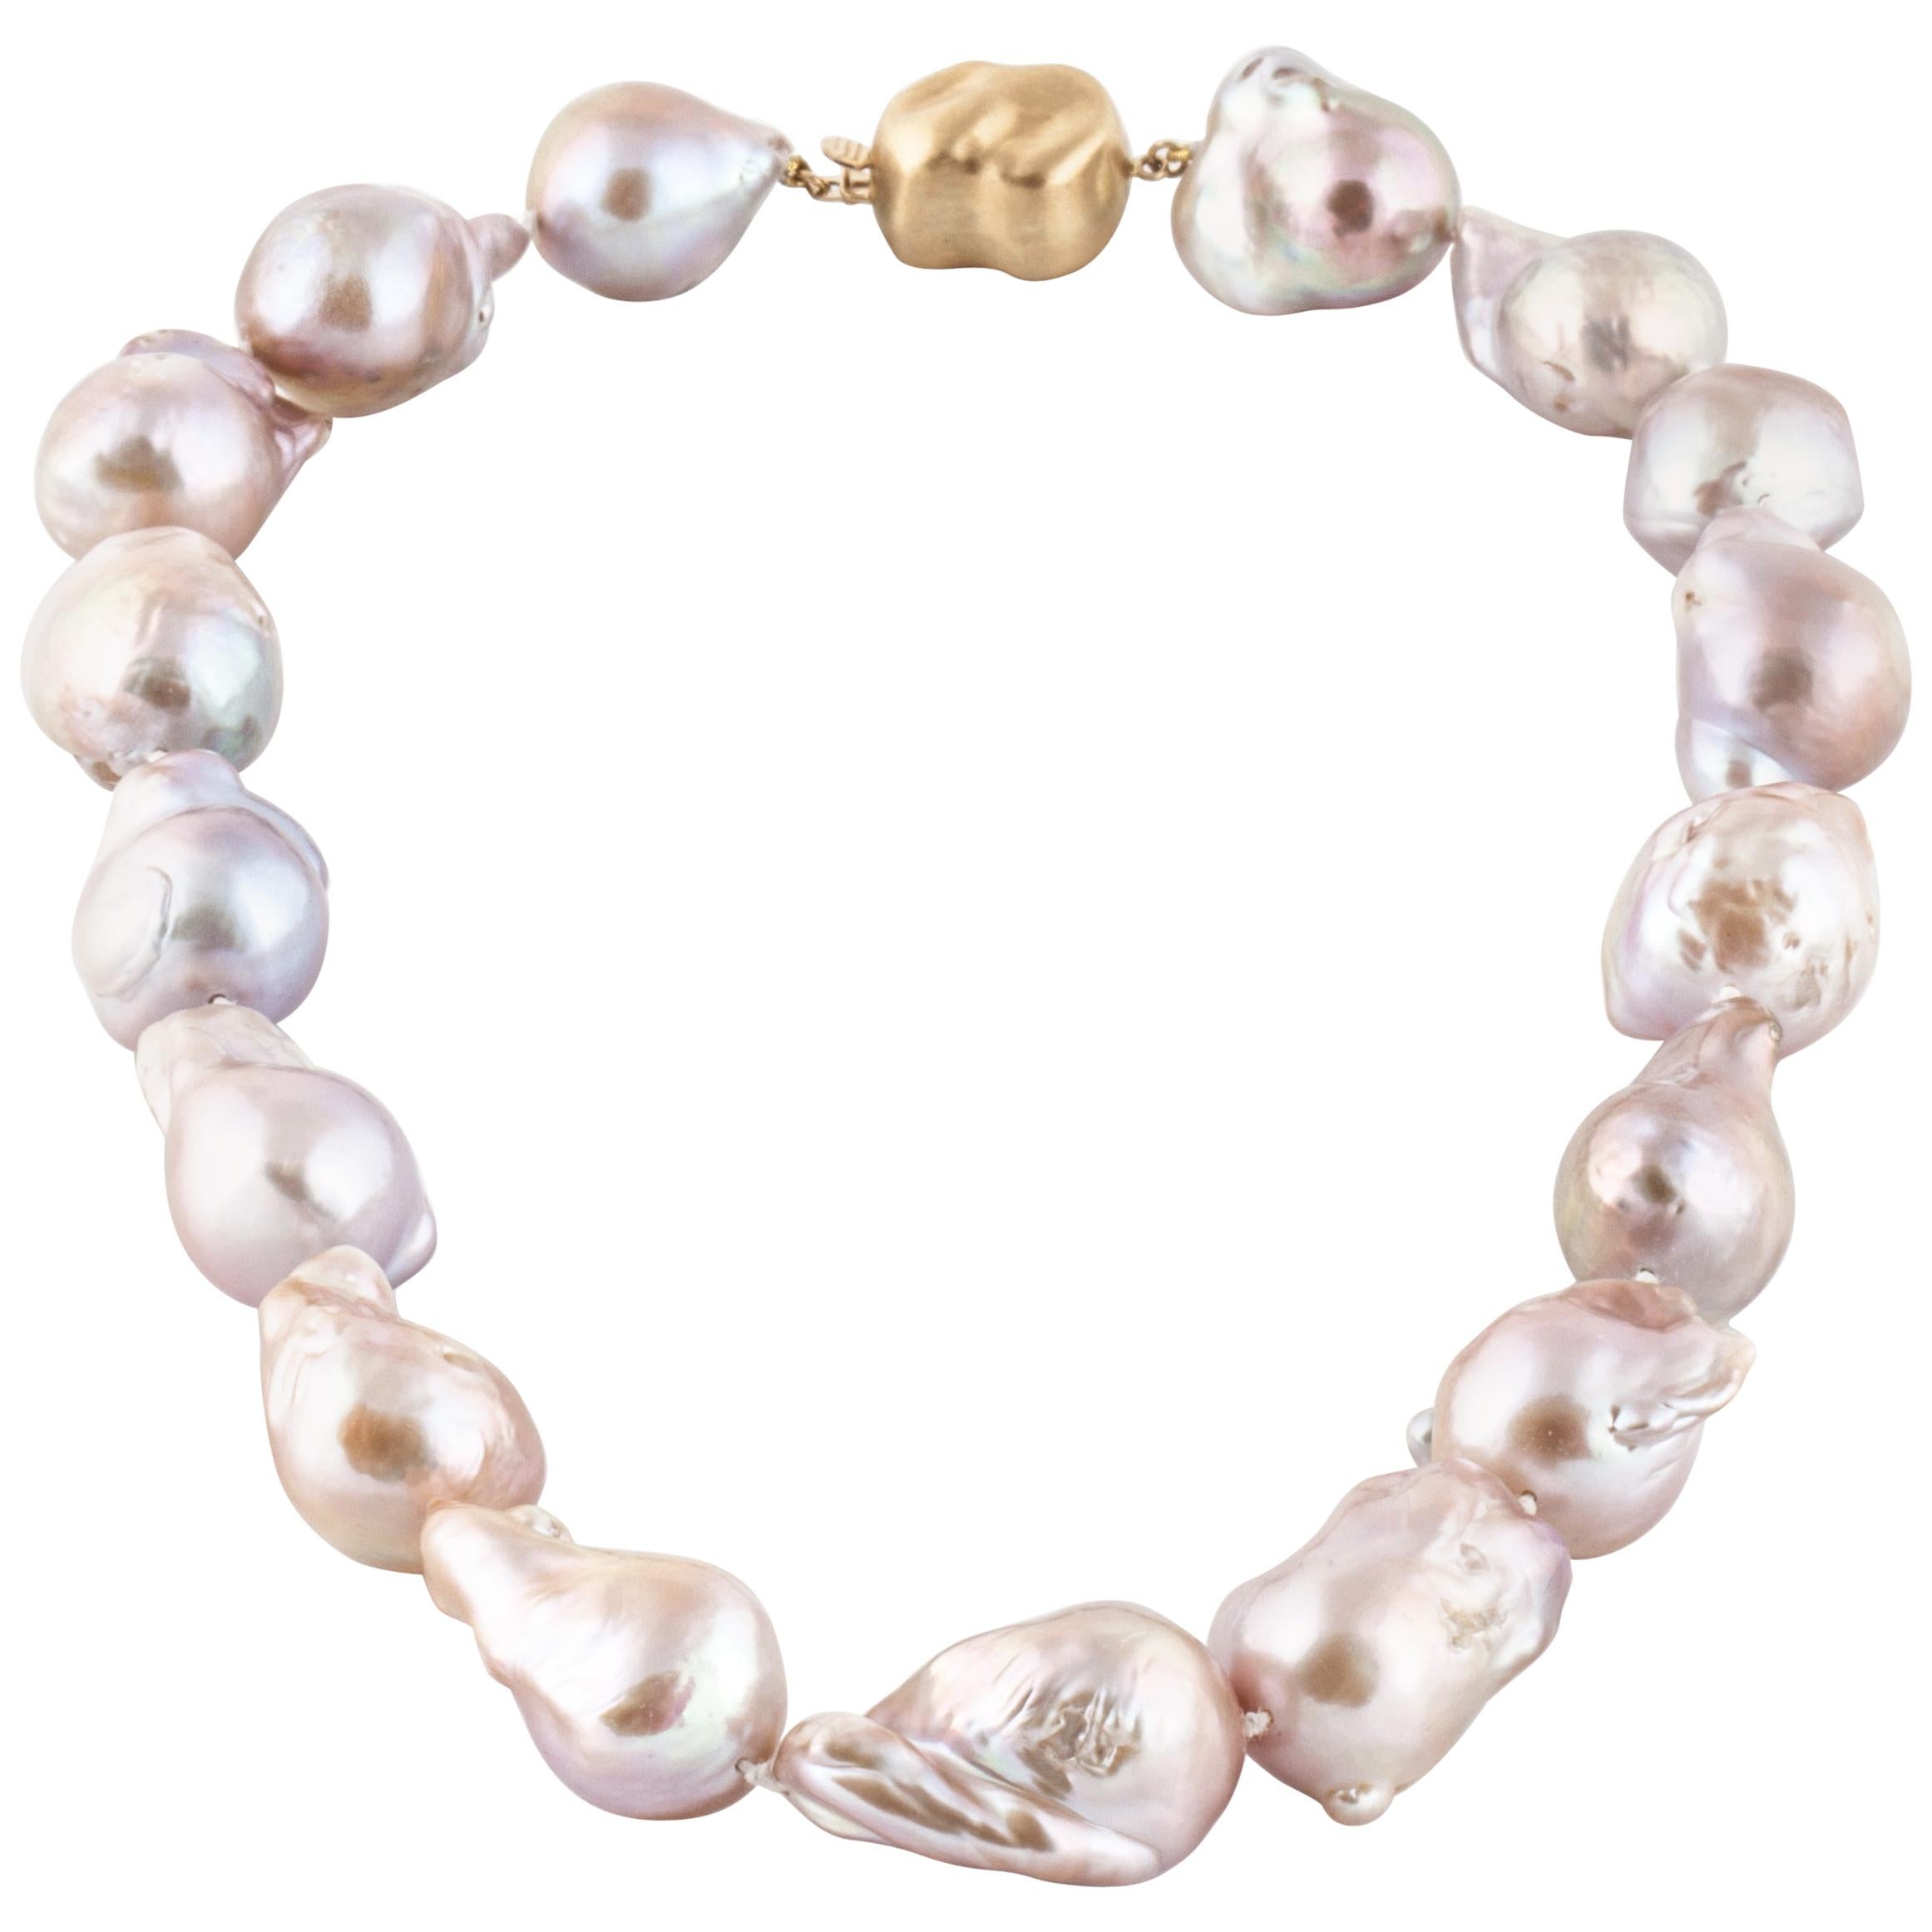 Silver clasp Pink natural Baroque Pearl Necklace 18 inches Bohemia 